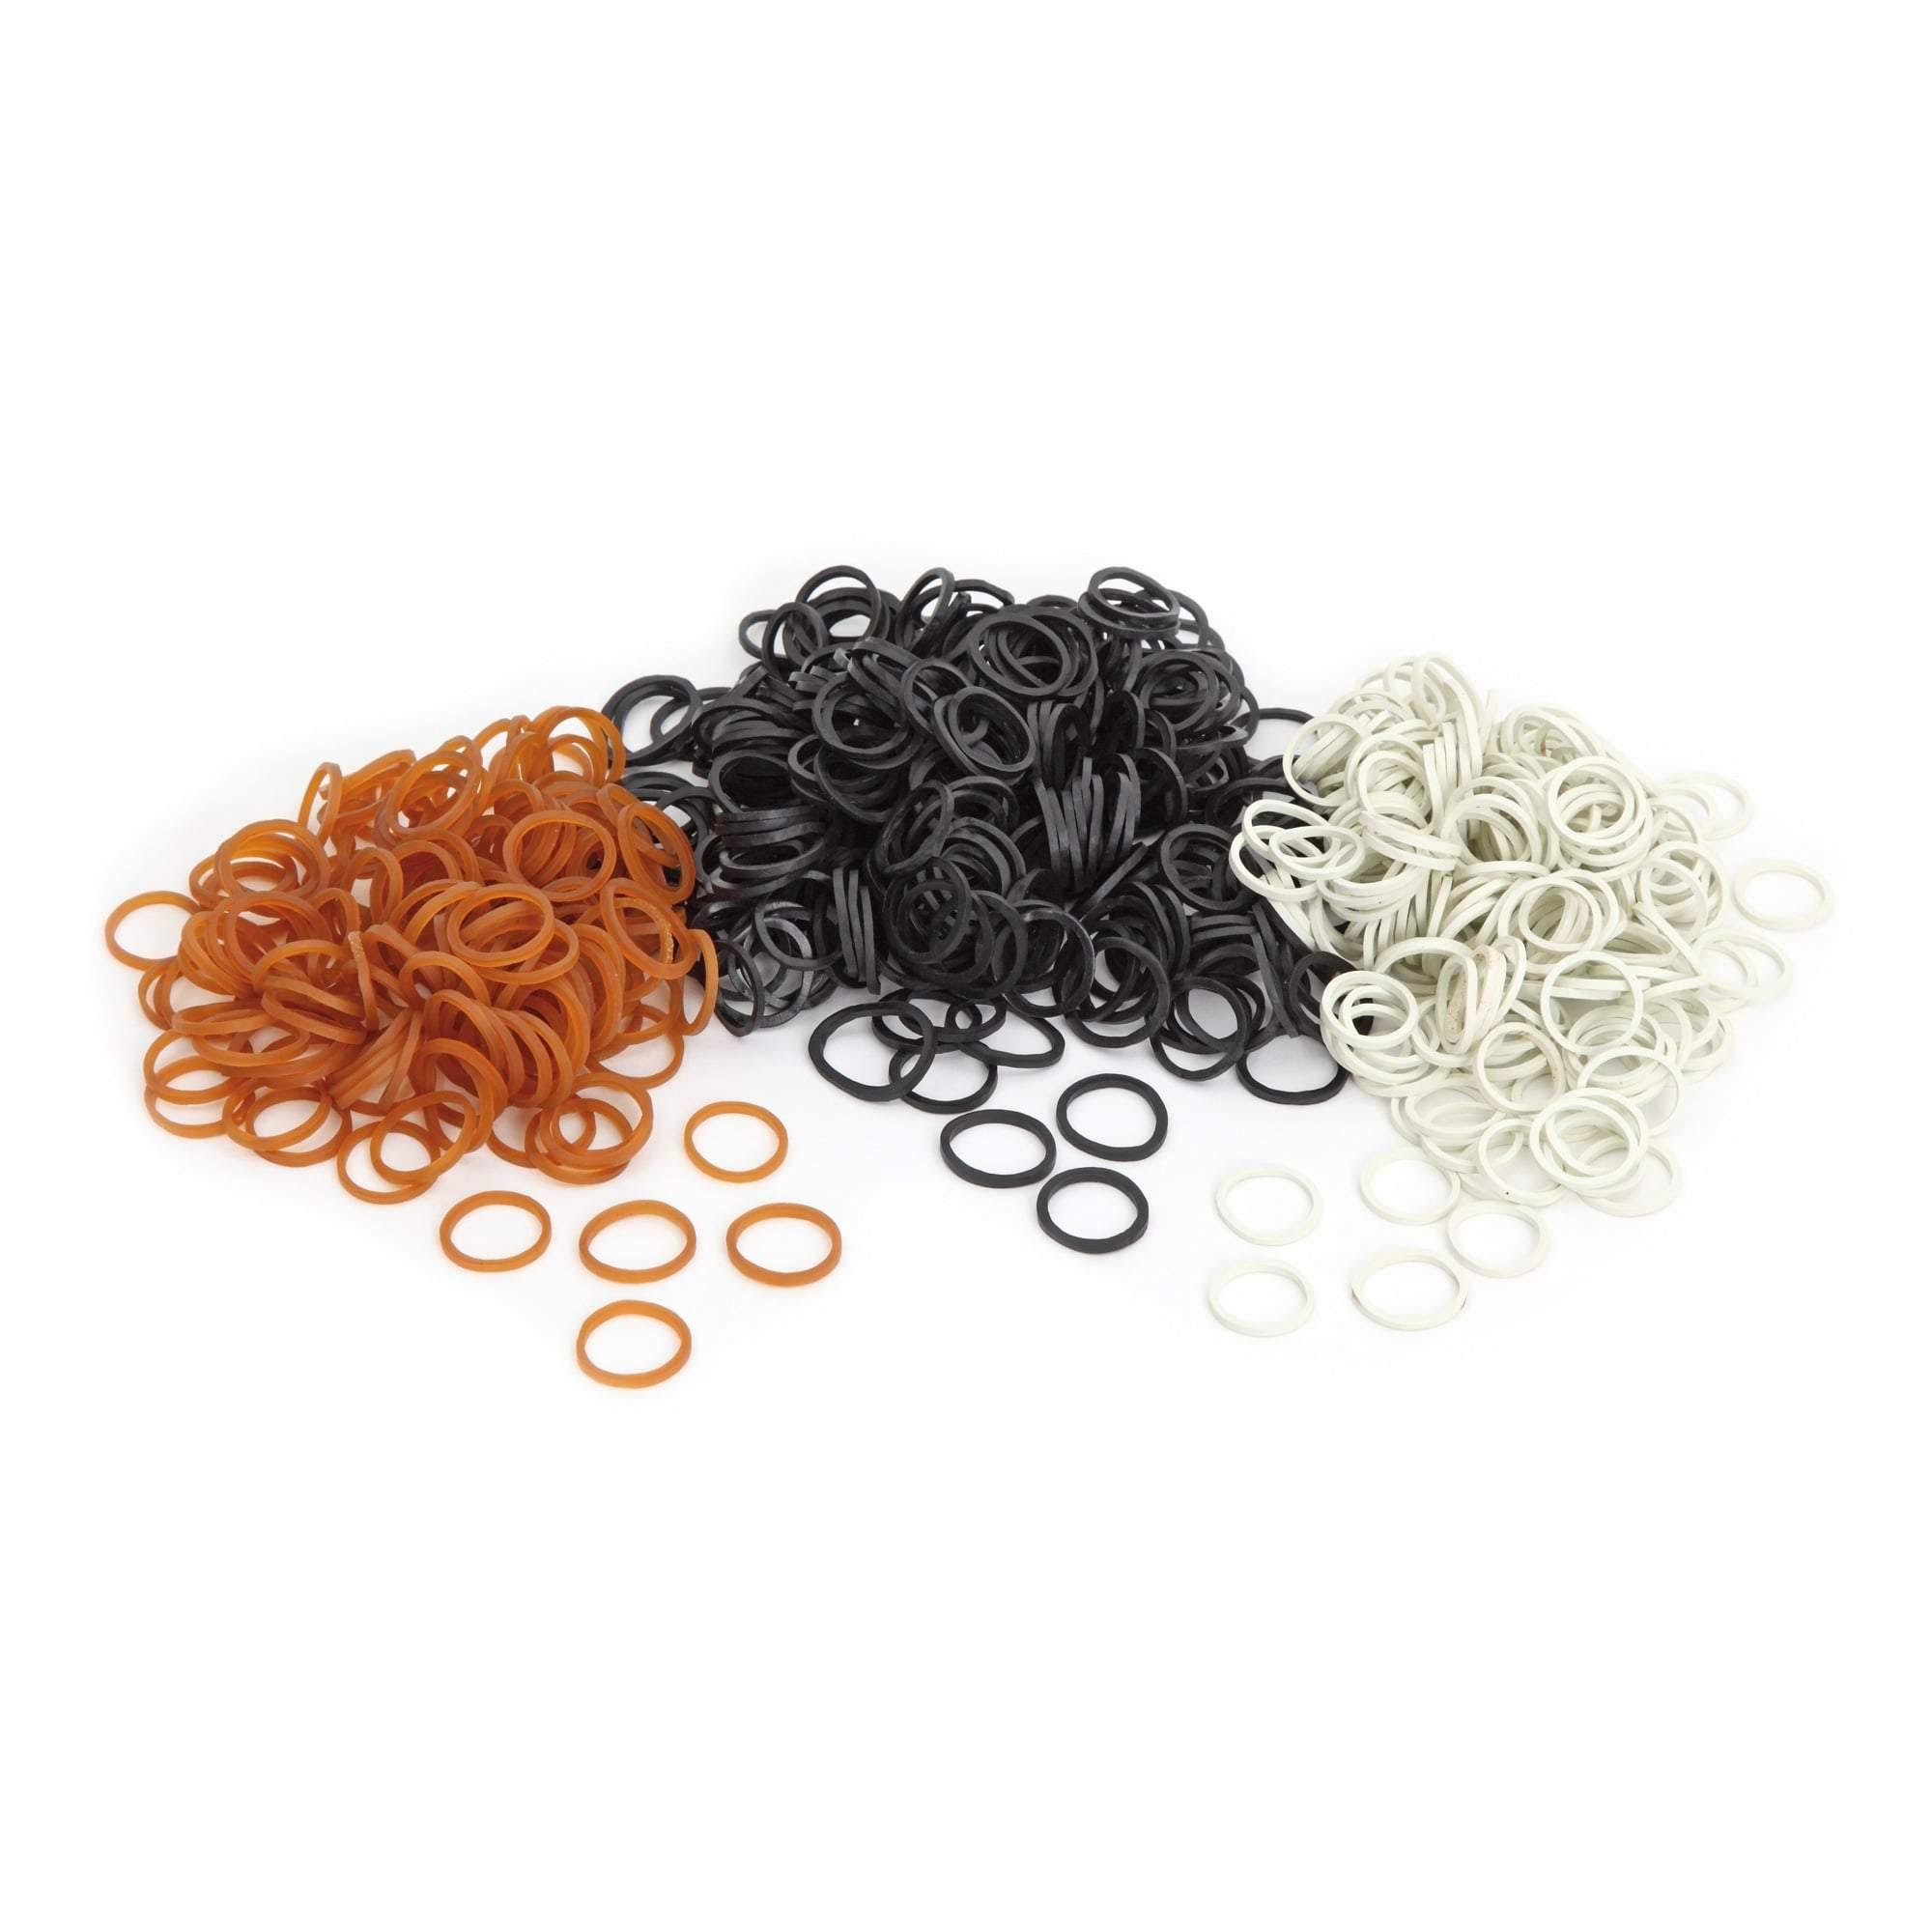 Shires Ezi Groom Silicone Plaiting Bands 